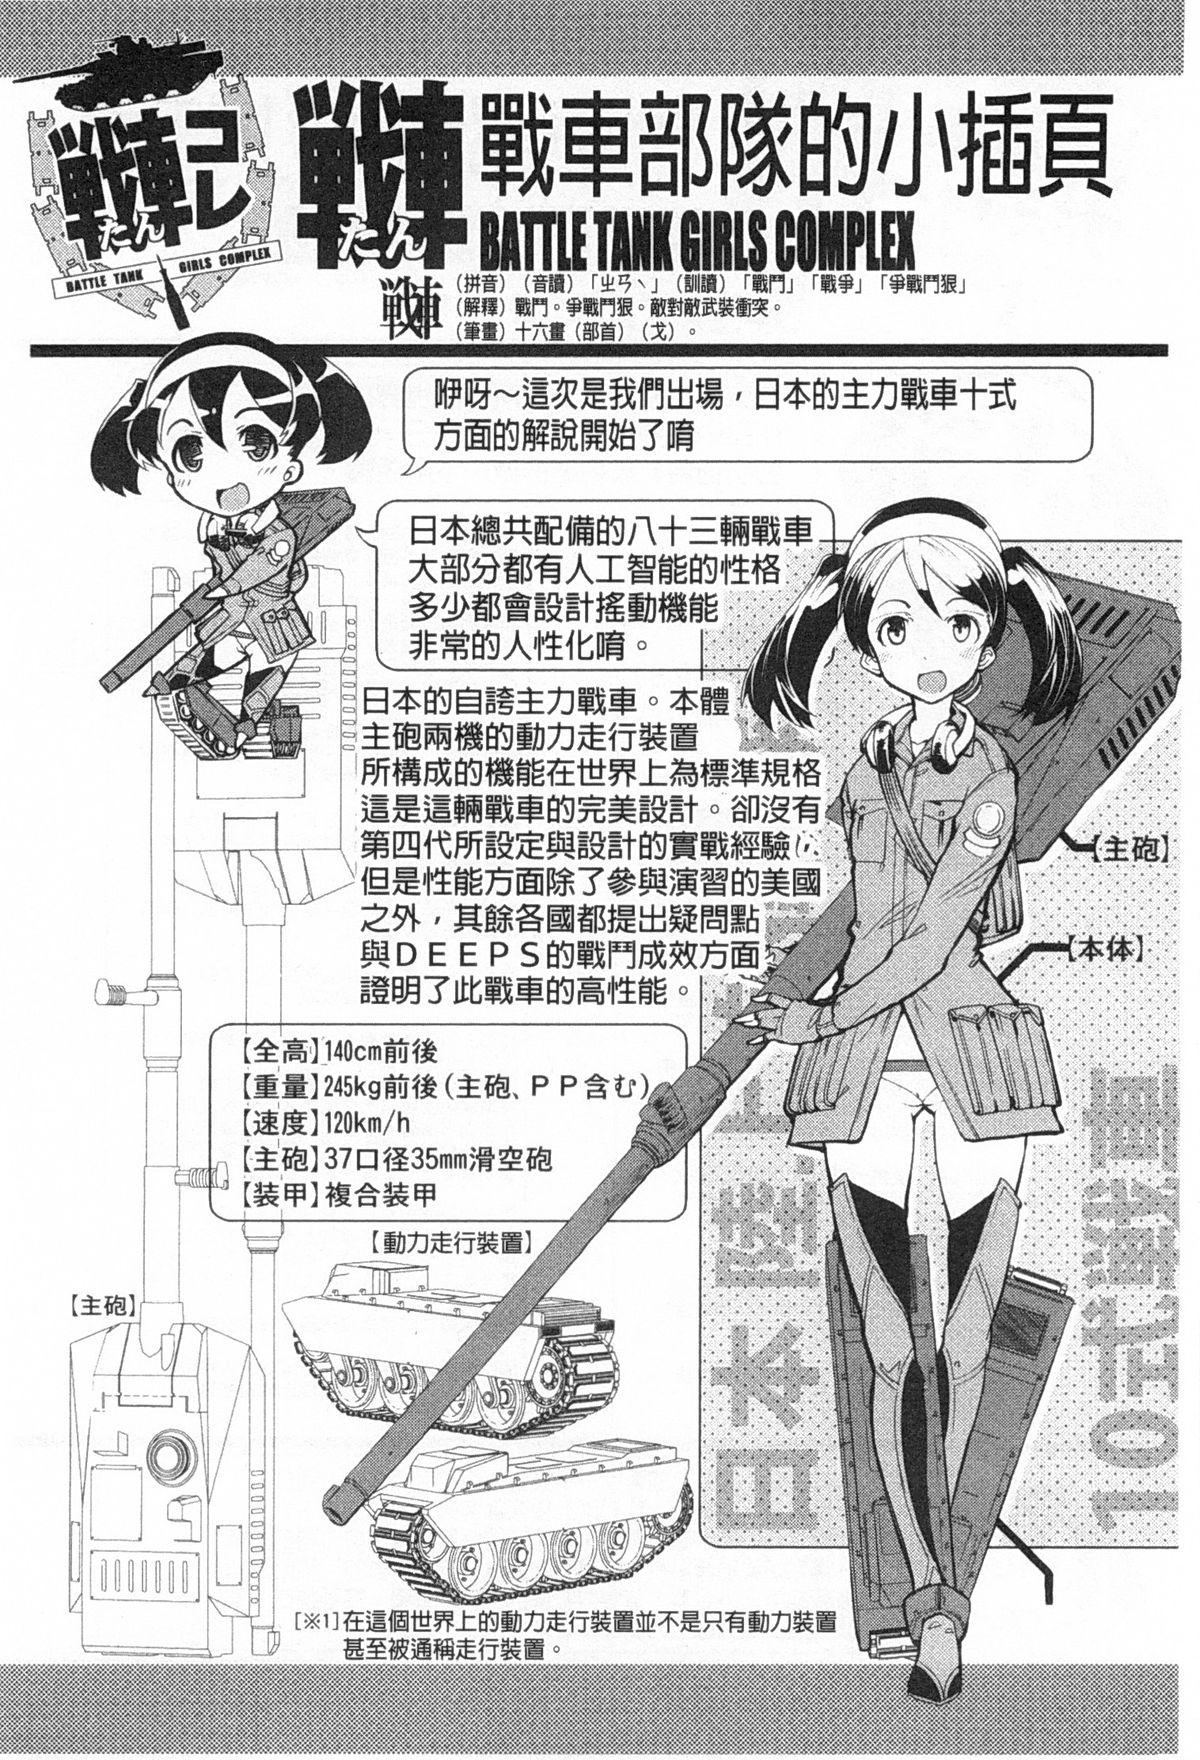 Tancolle - Battle Tank Girls Complex | TAN COLLE戰車收藏 48